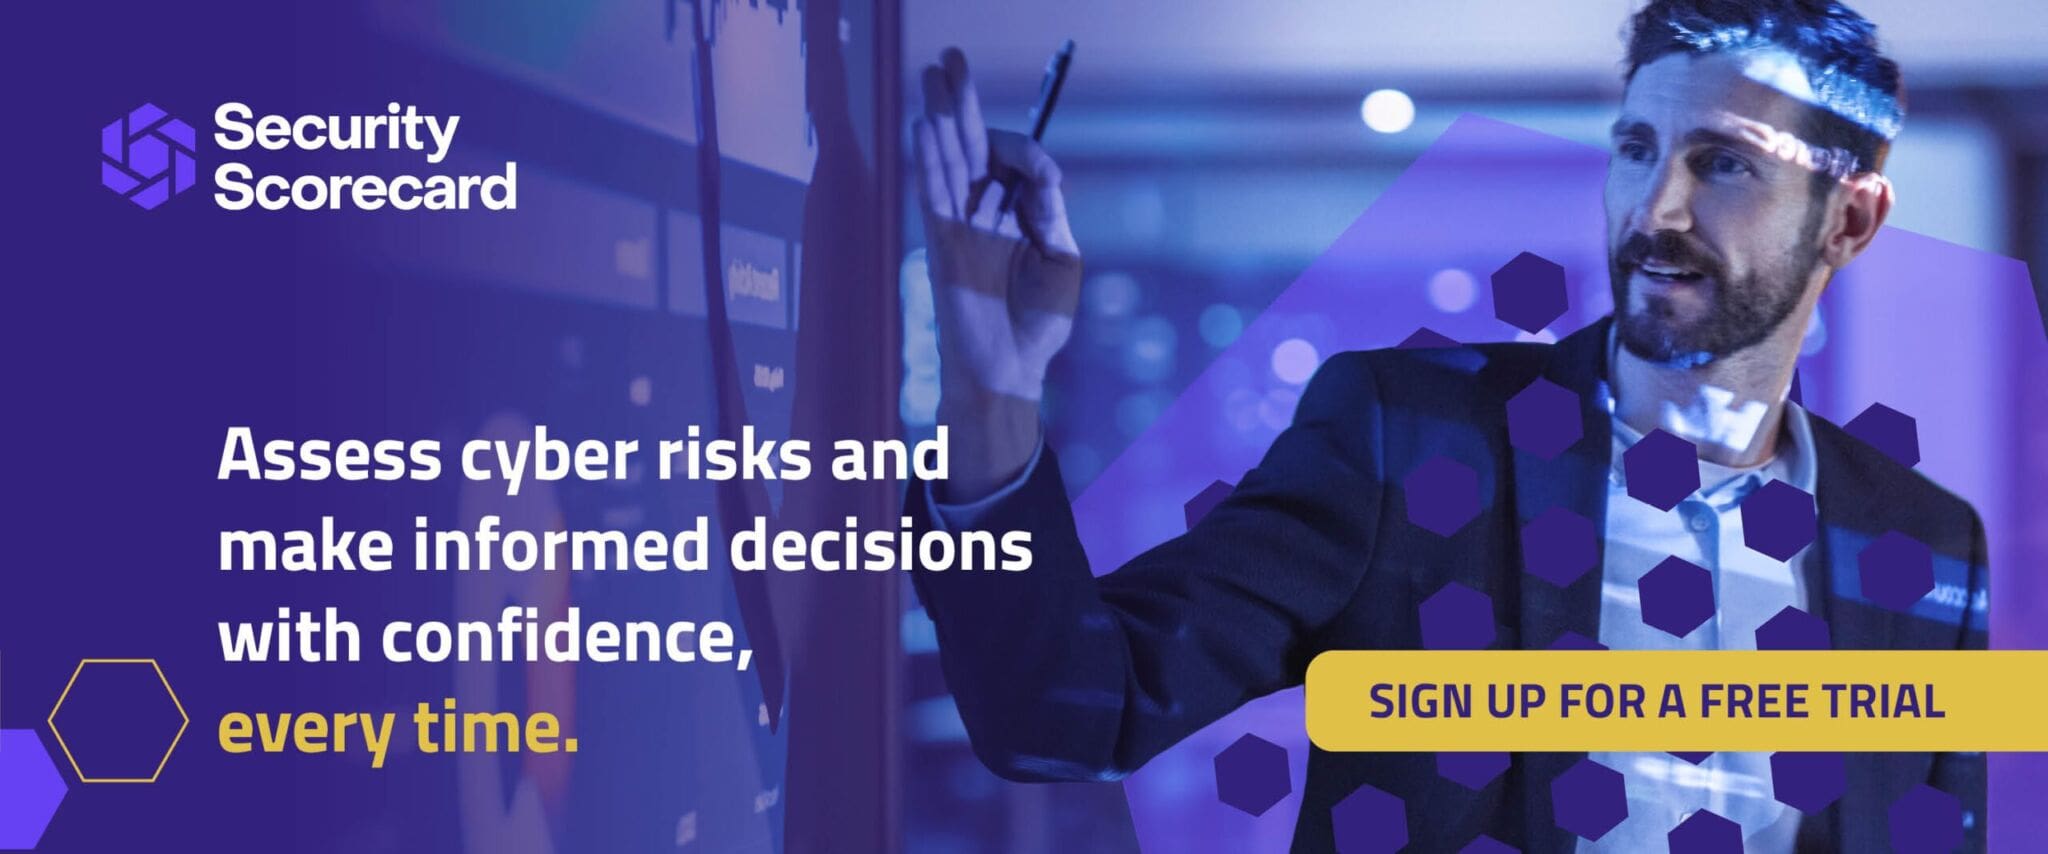 Access cyber risks and make informed decisions with confidence every time